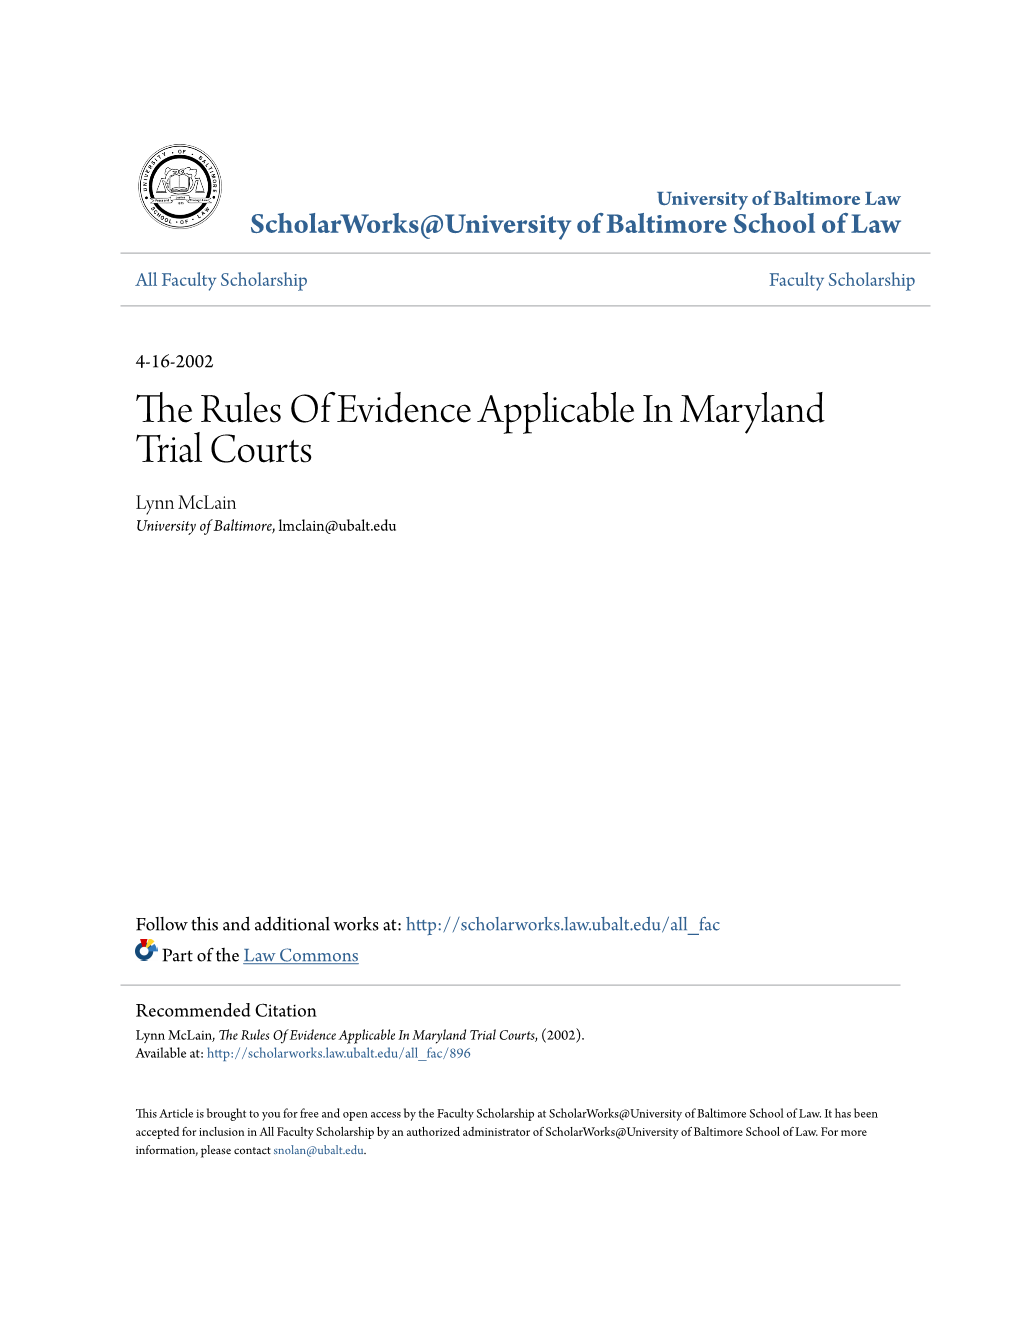 The Rules of Evidence Applicable in Maryland Trial Courts Lynn Mclain University of Baltimore, Lmclain@Ubalt.Edu